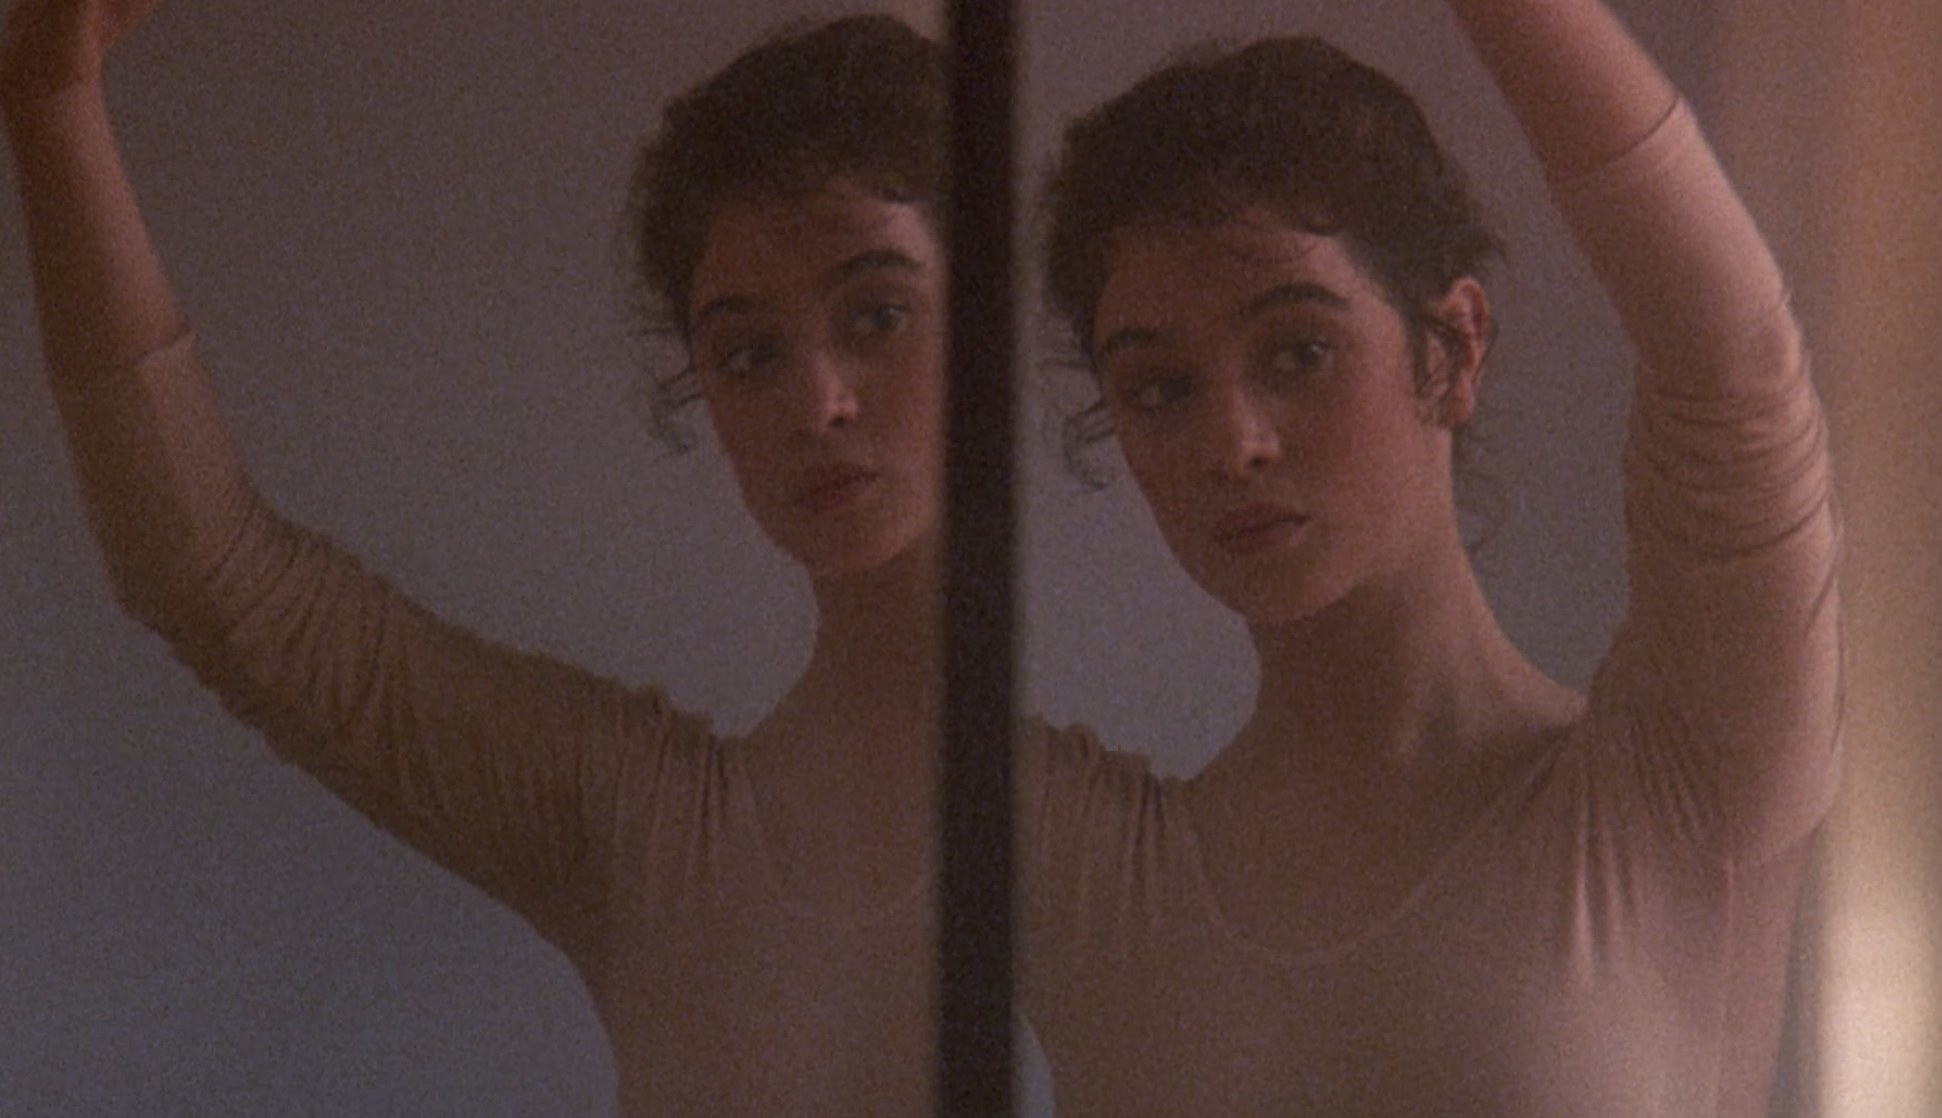 Actor Moira Kelly looks at two of her reflections and wears a light pink leotard.